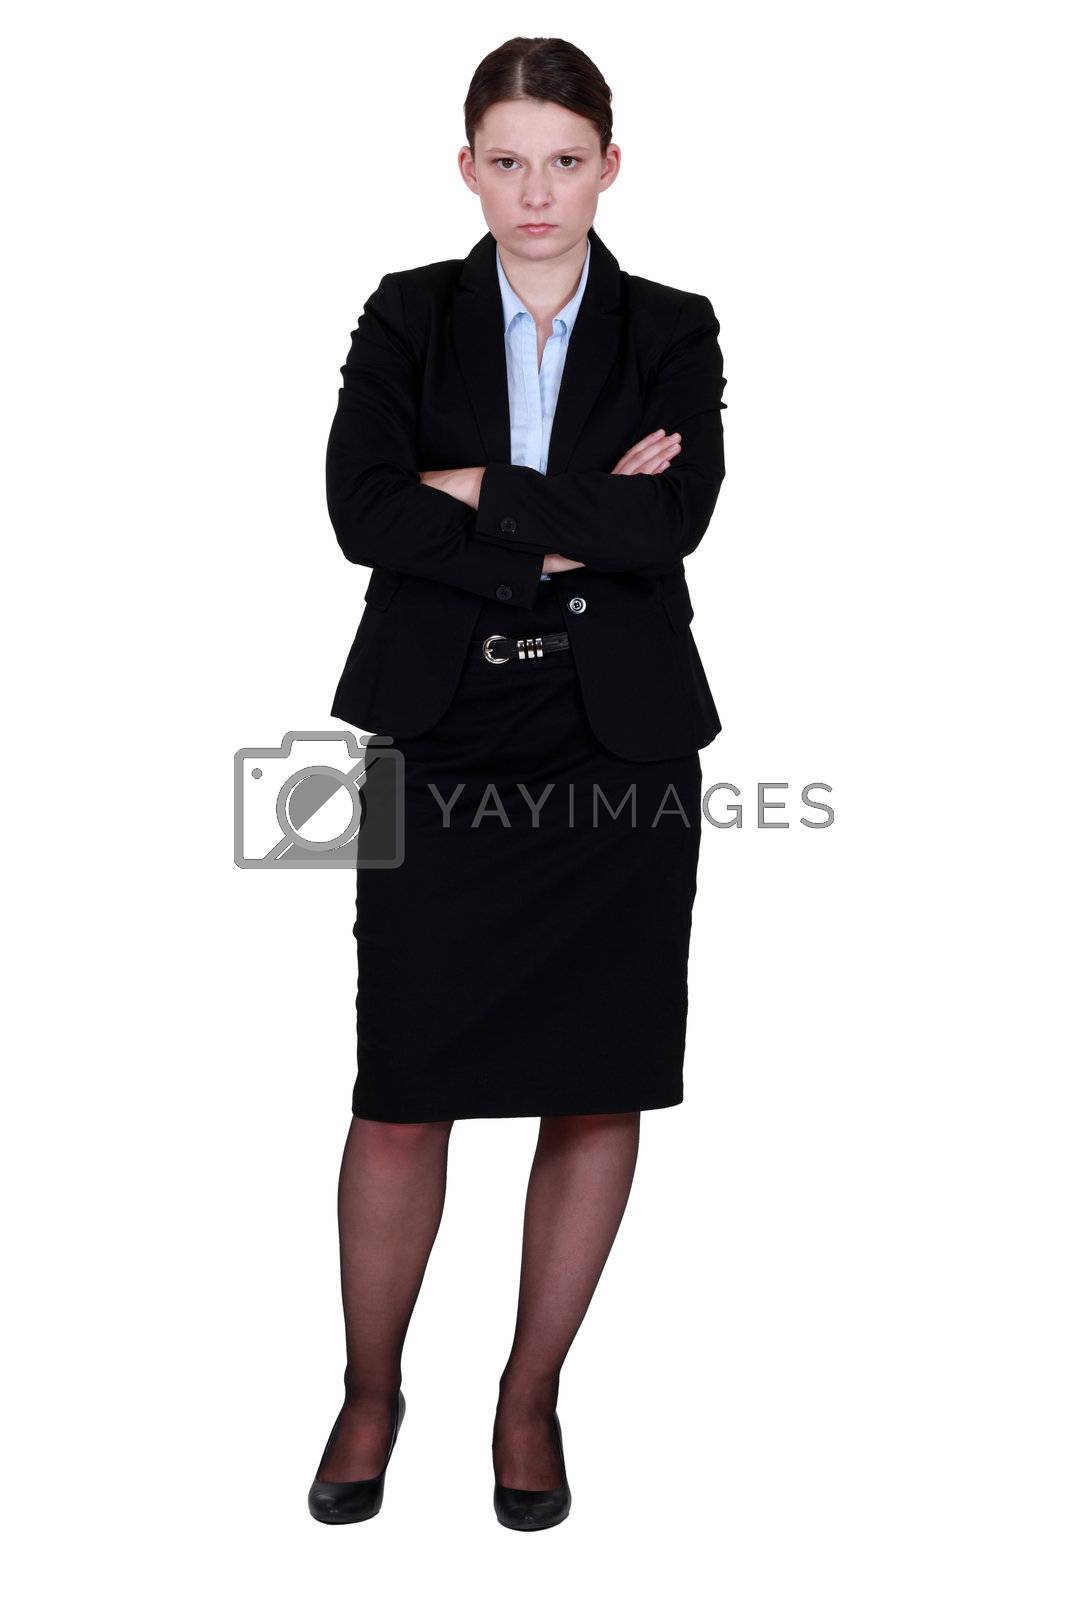 Royalty free image of A moody businesswoman by phovoir